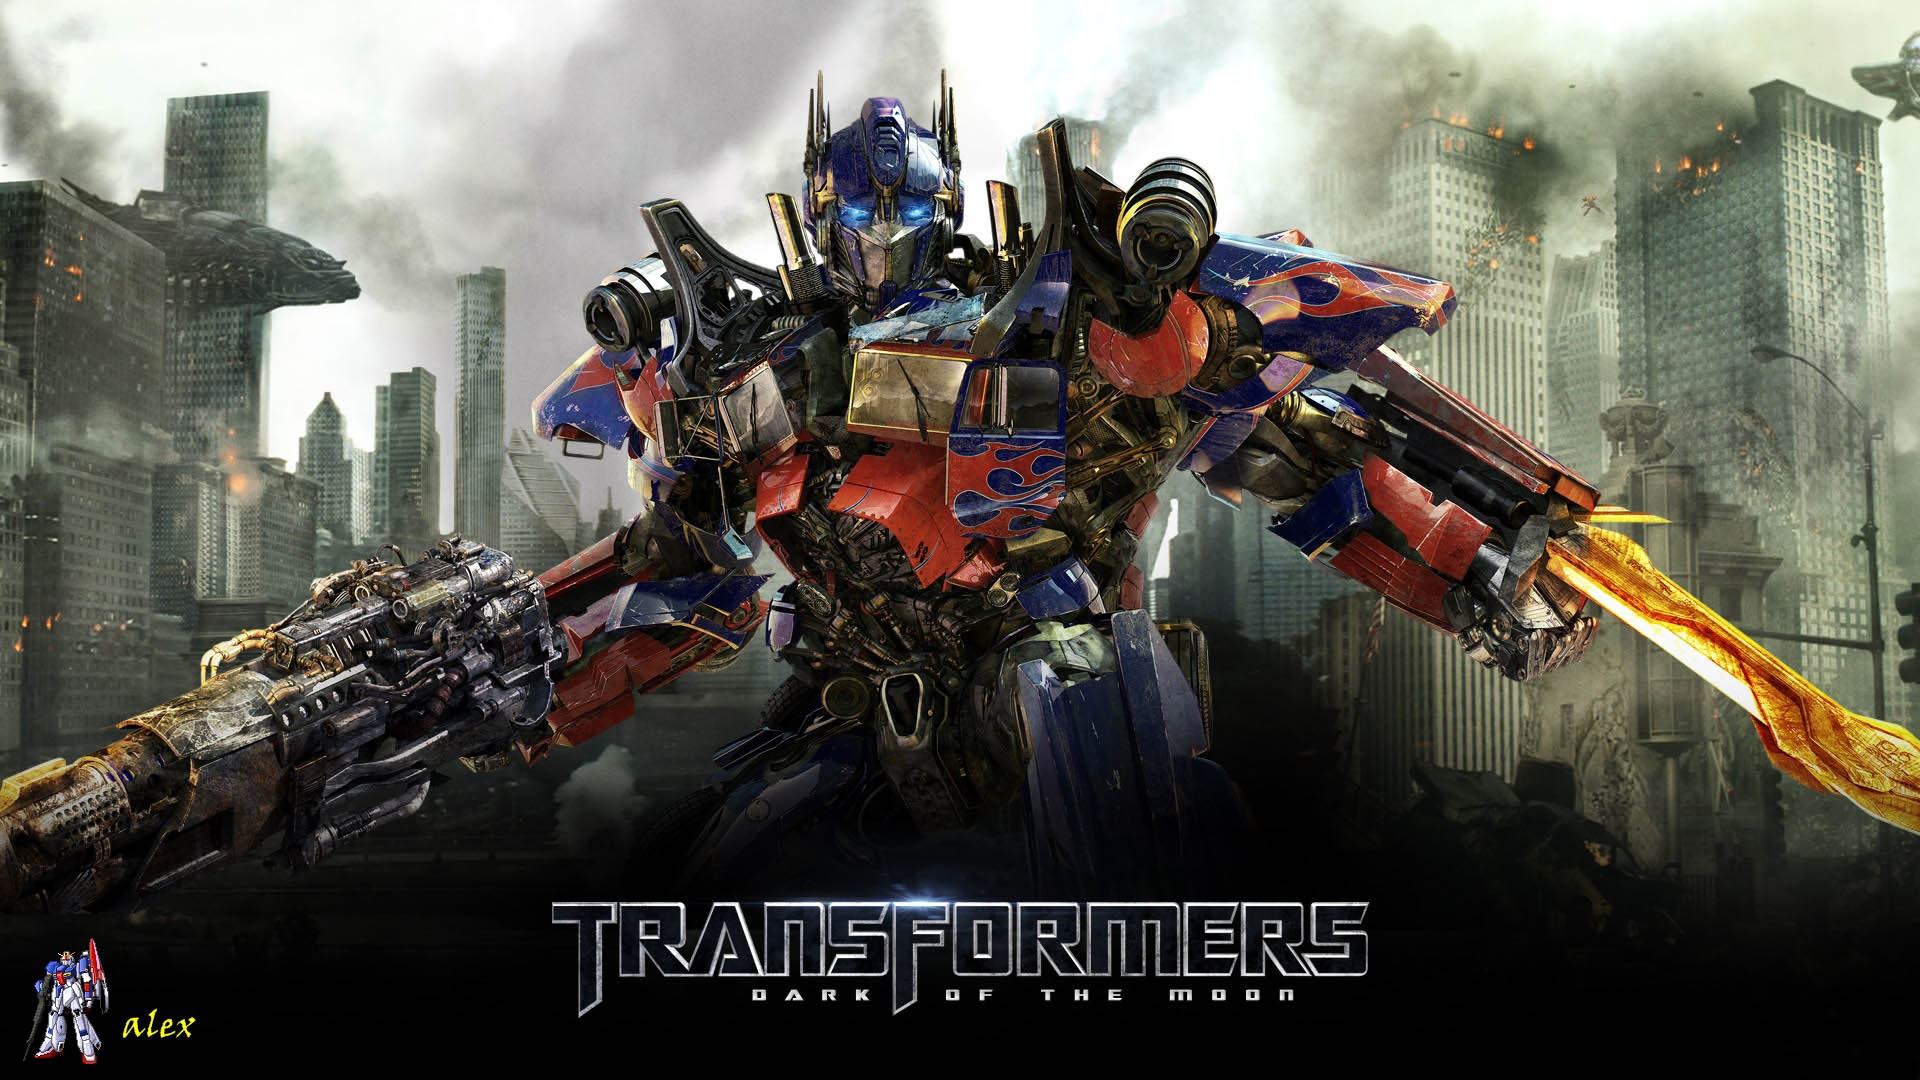 Optimus Prime is the powerful Autobot leader who appears in Battle World. Although he is very small compared to many of the other combatants, ...